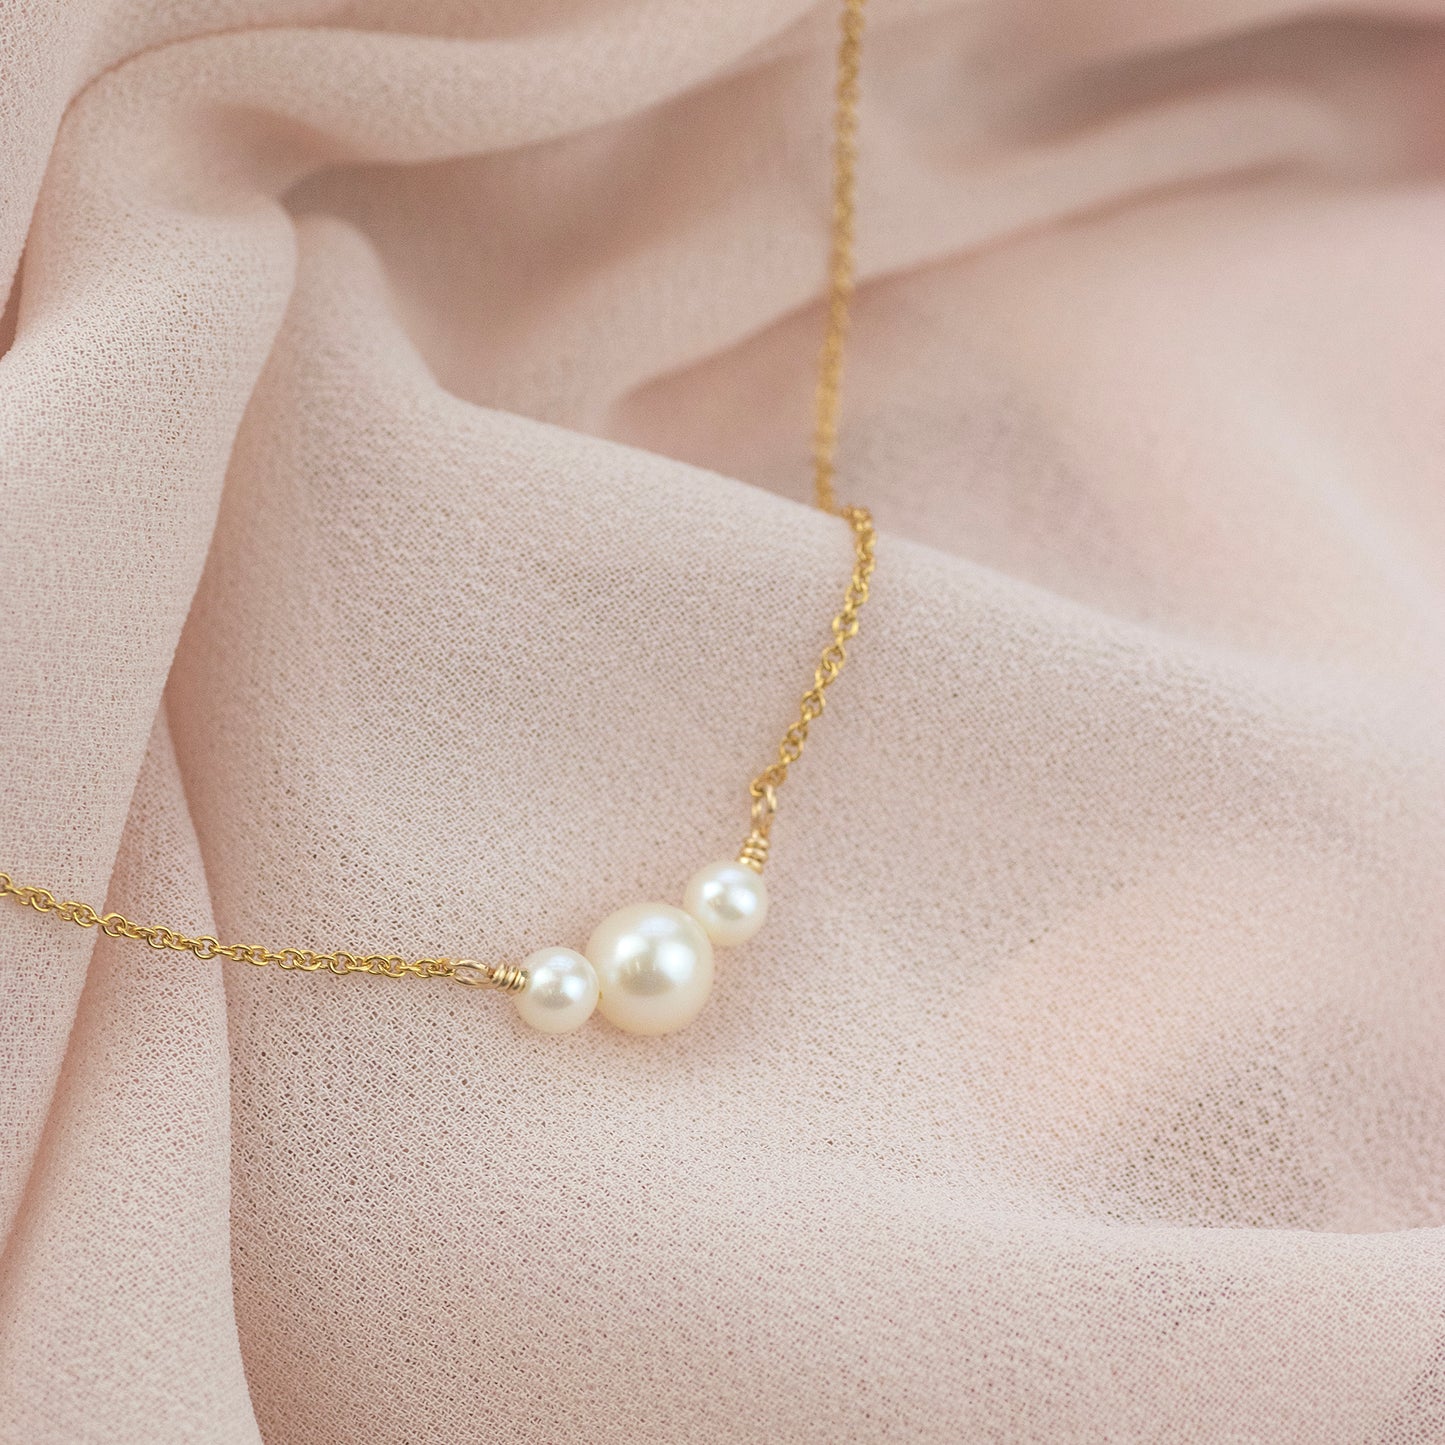 Gift for Grandma - 3 Pearls for 3 Generations Necklace - Silver, Gold, Rose Gold